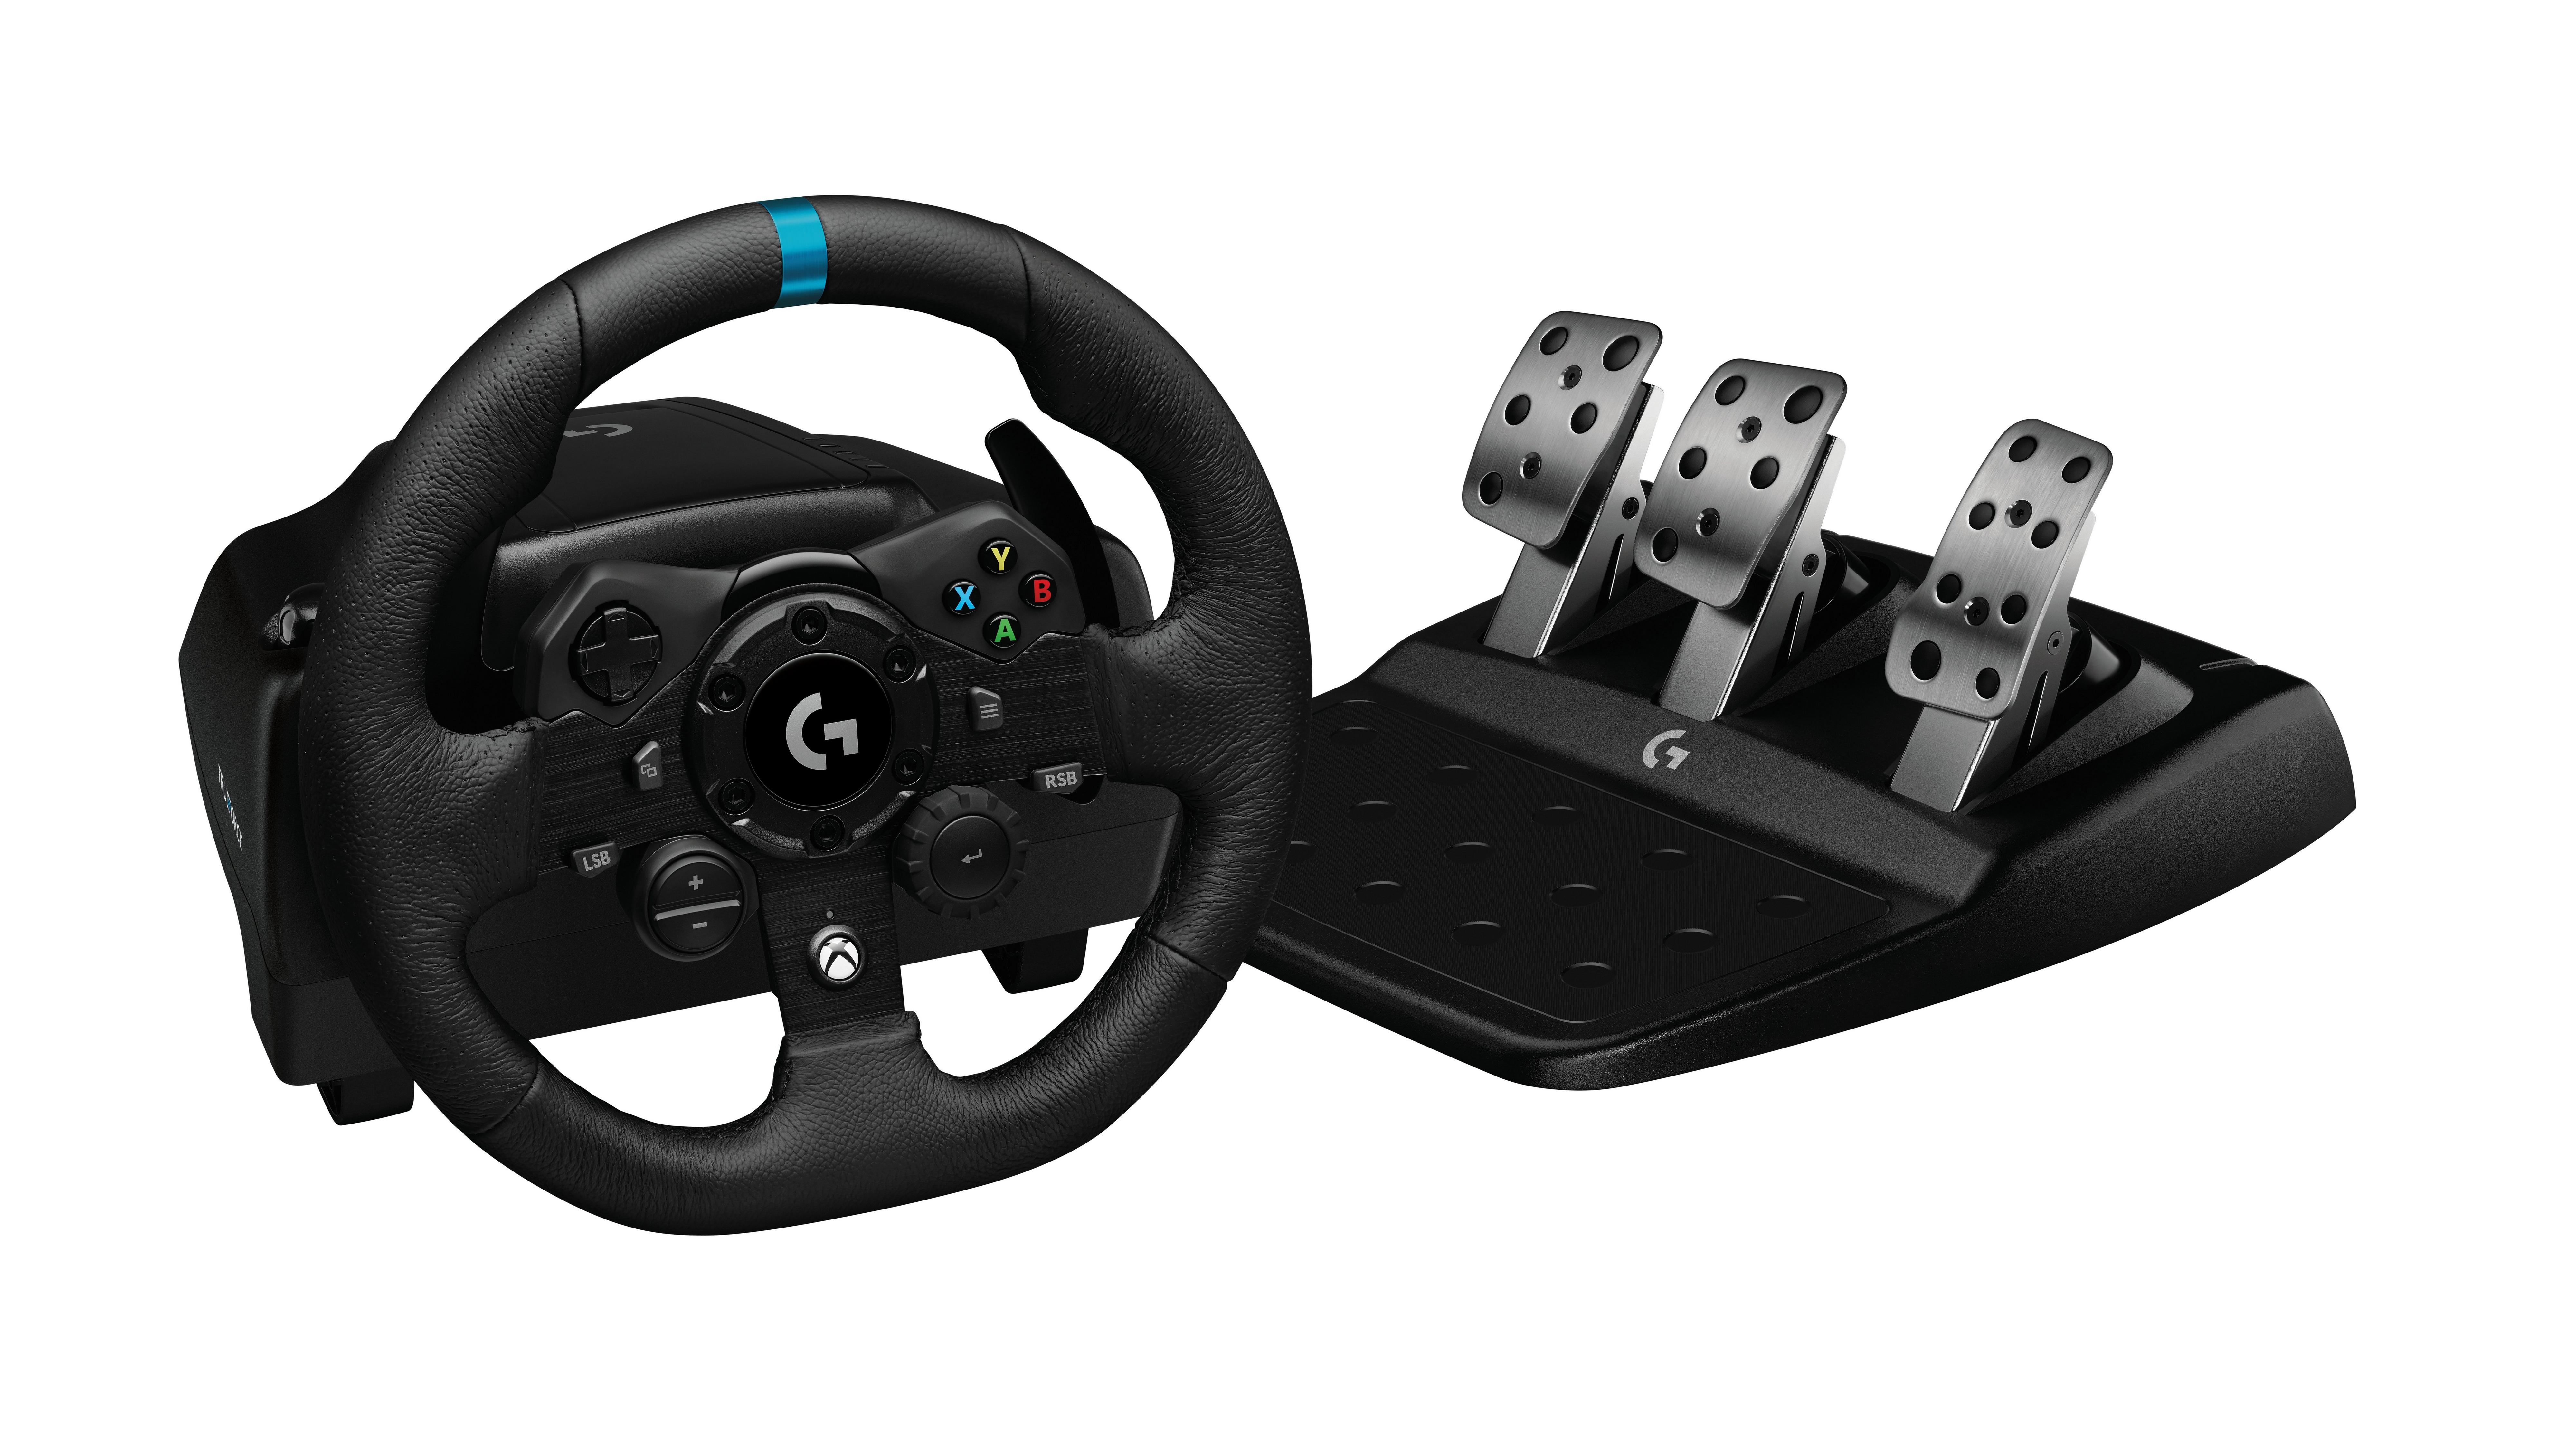 Logitech G923 Racing Wheel and Pedals